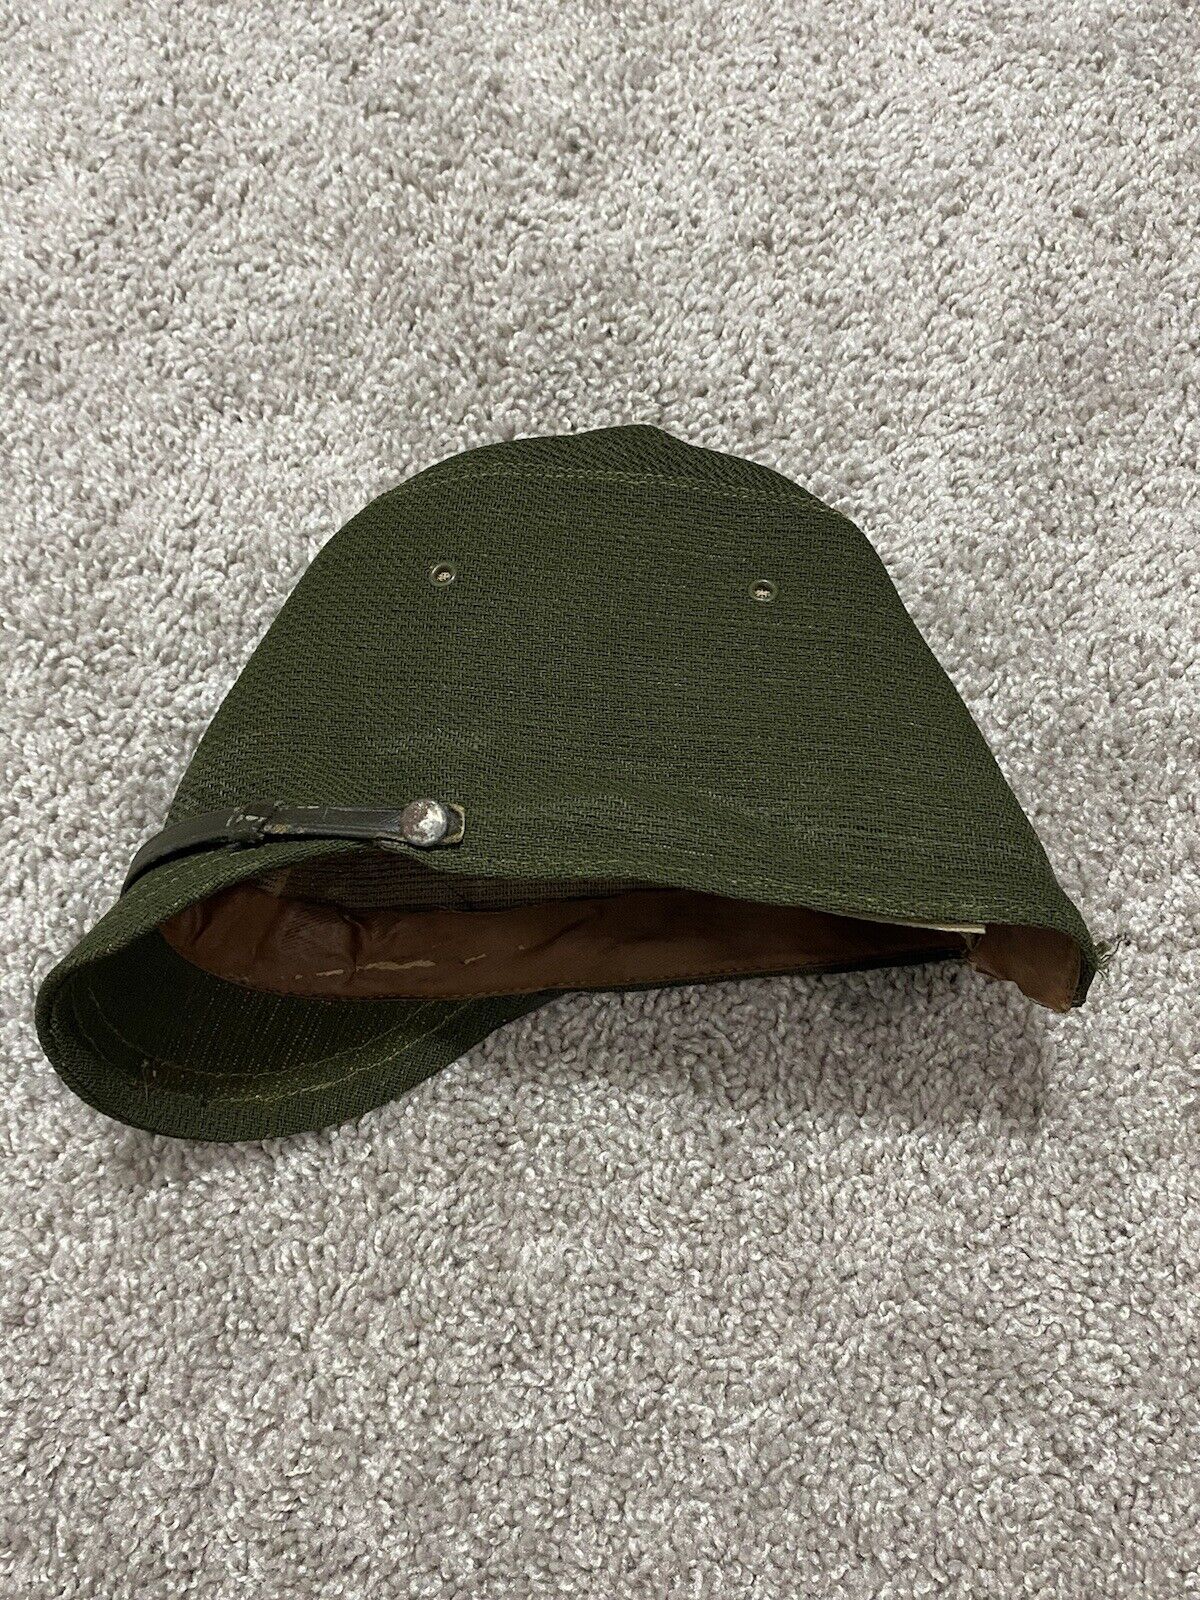 WWII Japanese Military Style Cap Civilian New Old Stock